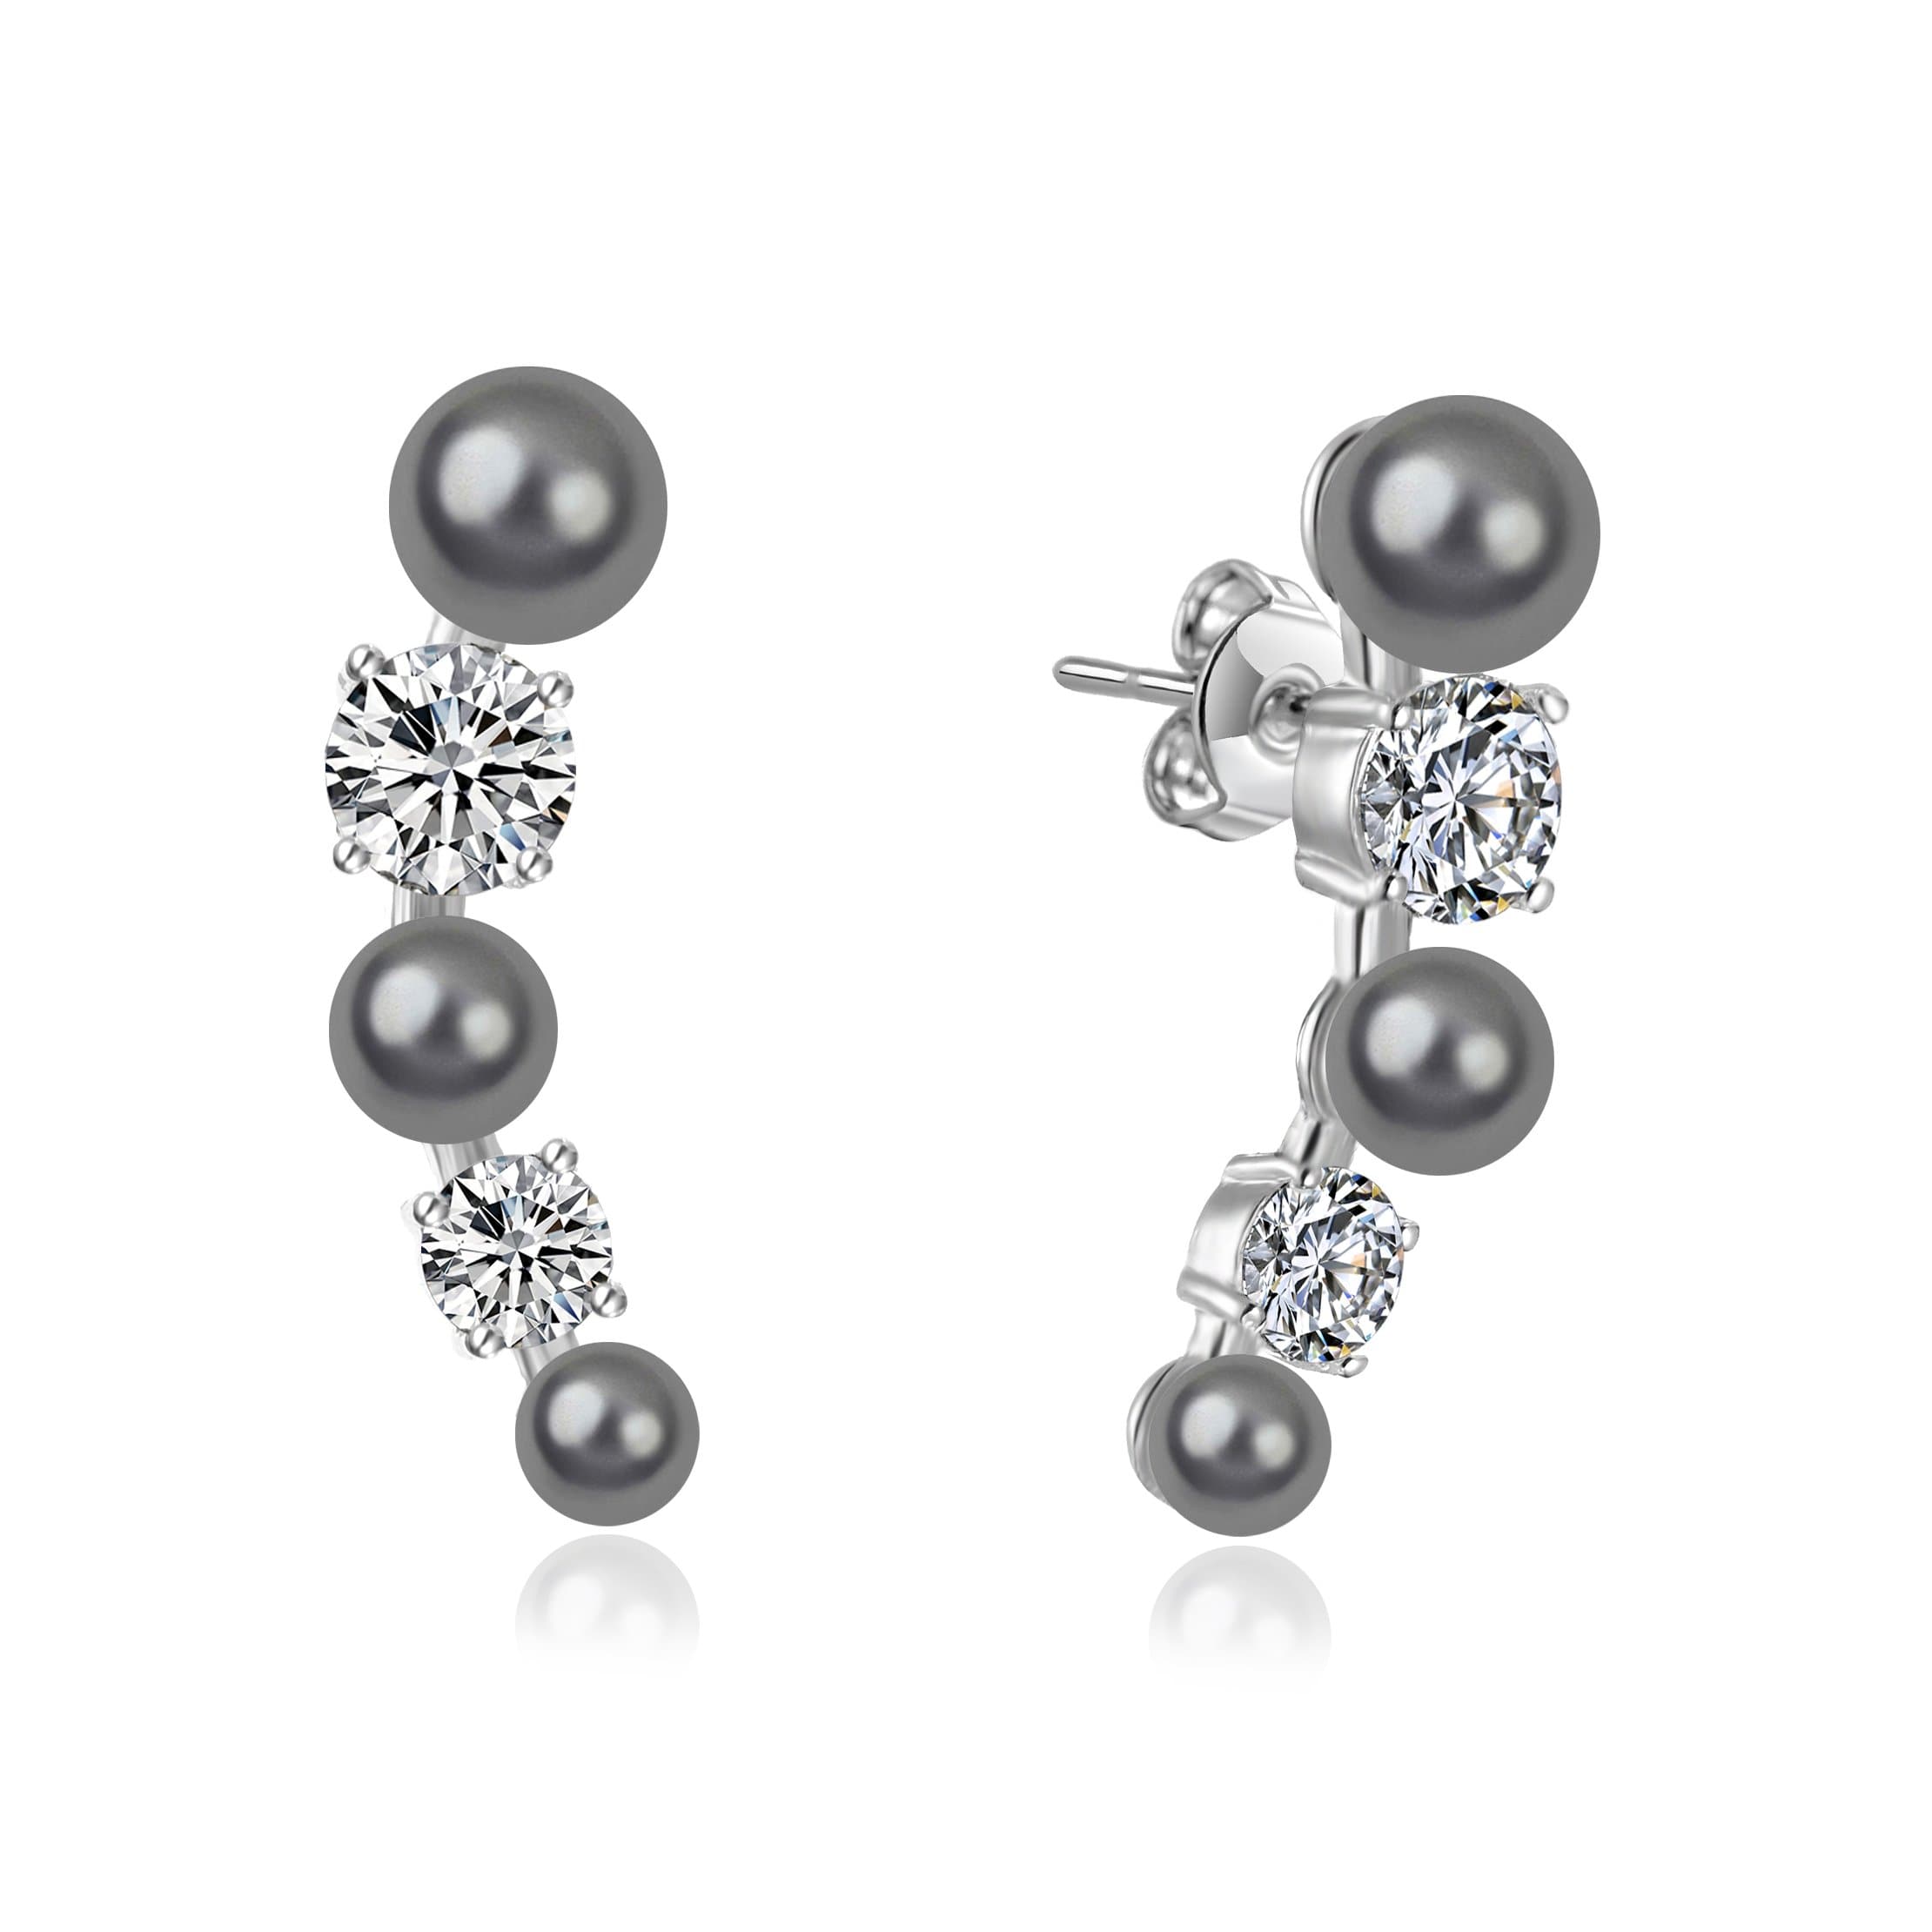 Grey Pearl Climber Earrings Created with Zircondia® Crystals by Philip Jones Jewellery